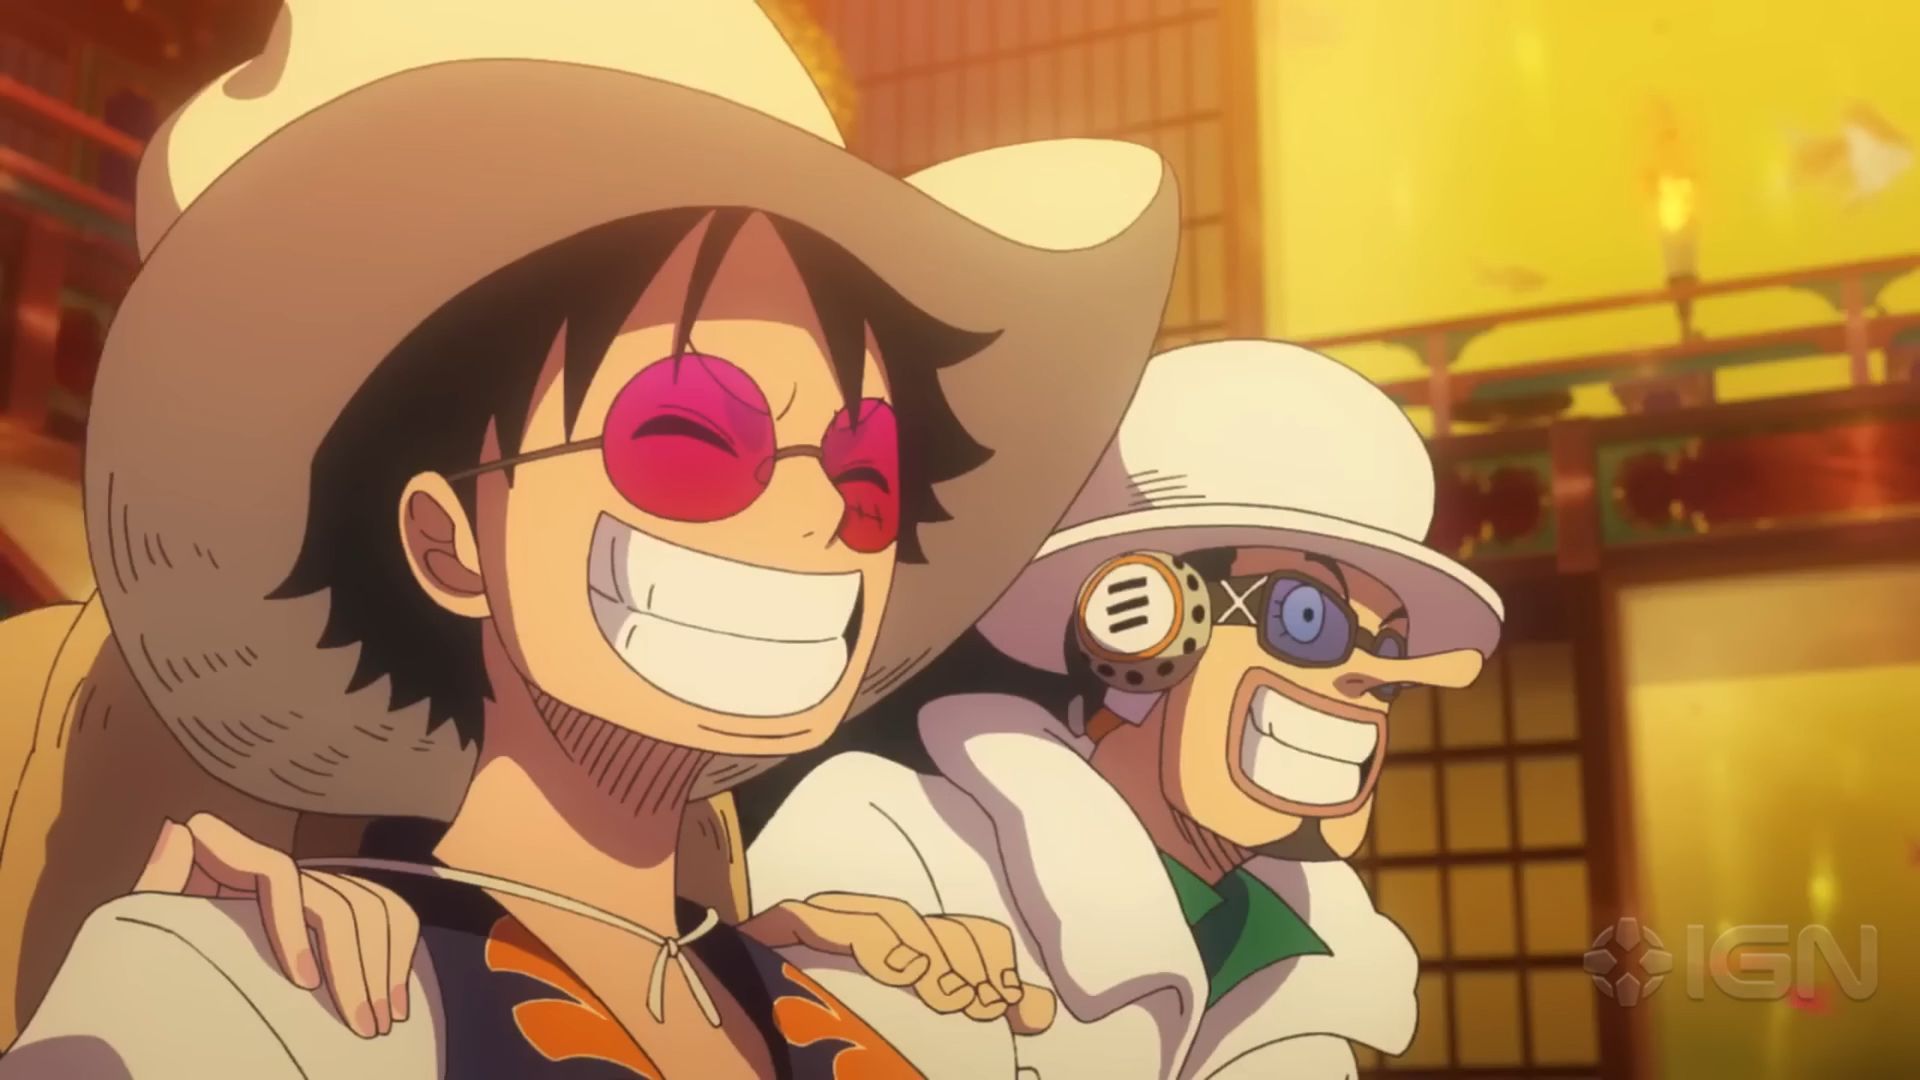 watching full One Piece_ Heart of Gold - Official Trailer for free. link in  descrition - BiliBili